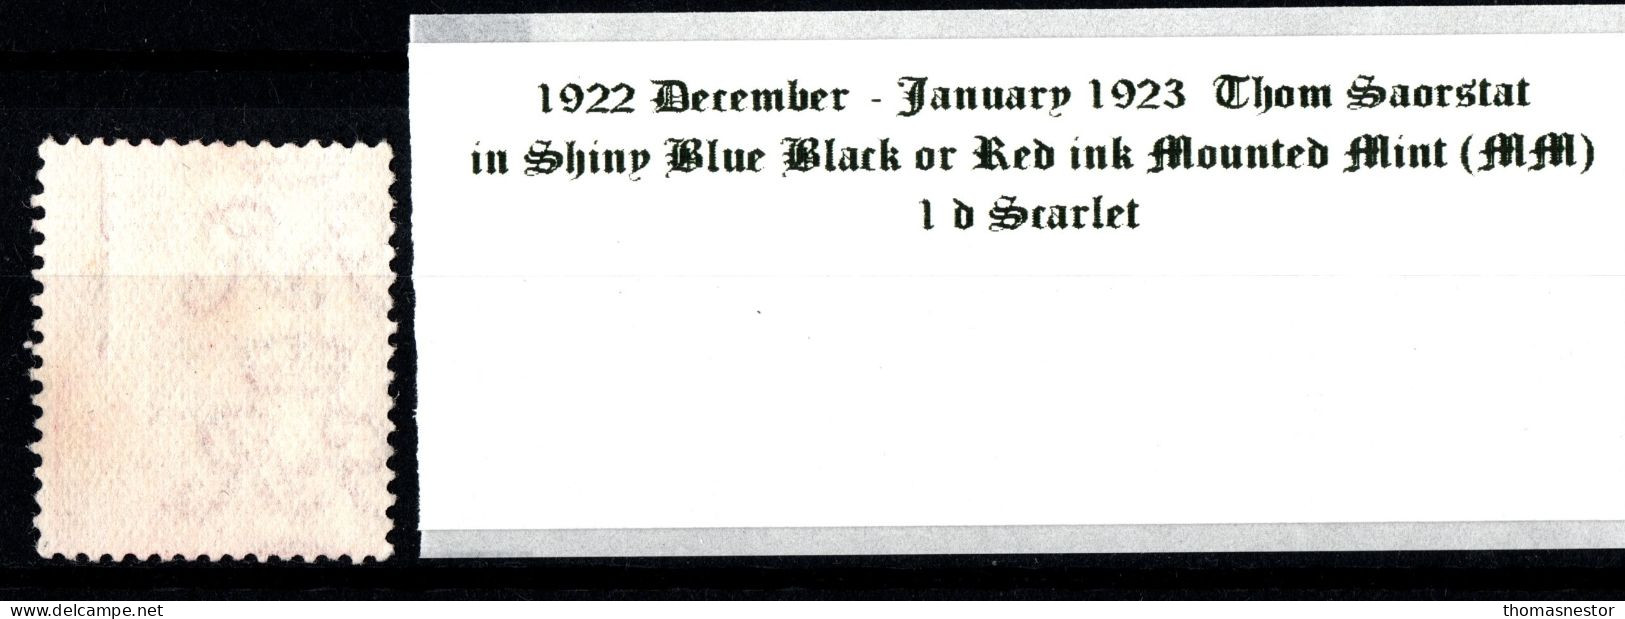 1922 - 1923 December - January Thom Saorstát In Shiny Blue Black Or Red Ink 1 D Scarlet Mounted Mint (MM) - Nuevos